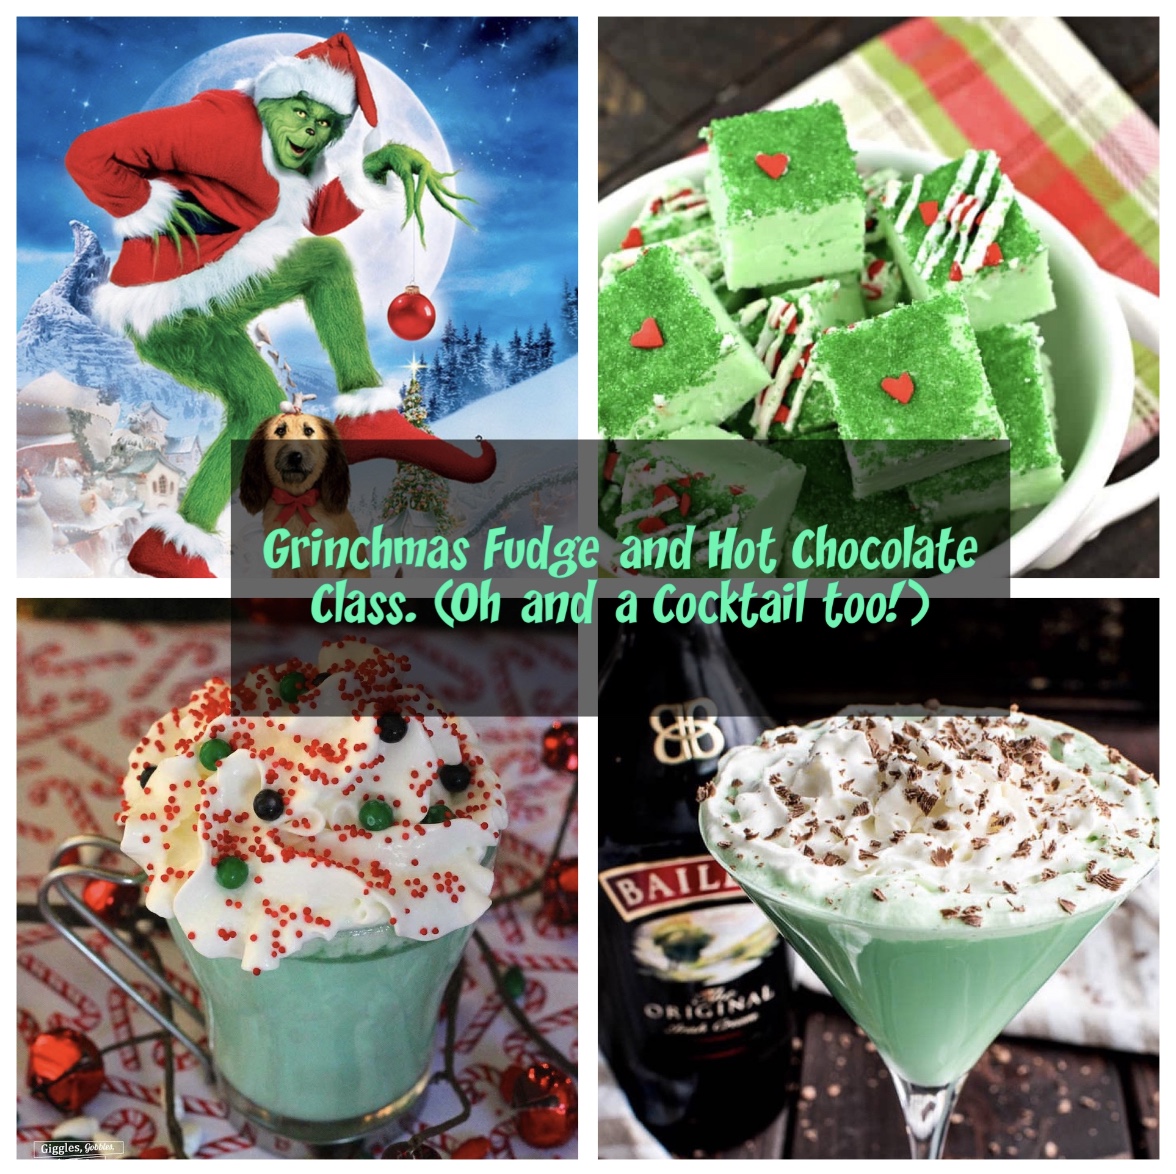 A Grinchmas Fudge Fancy Hot Chocolate and Cocktail Class experience project by Yaymaker